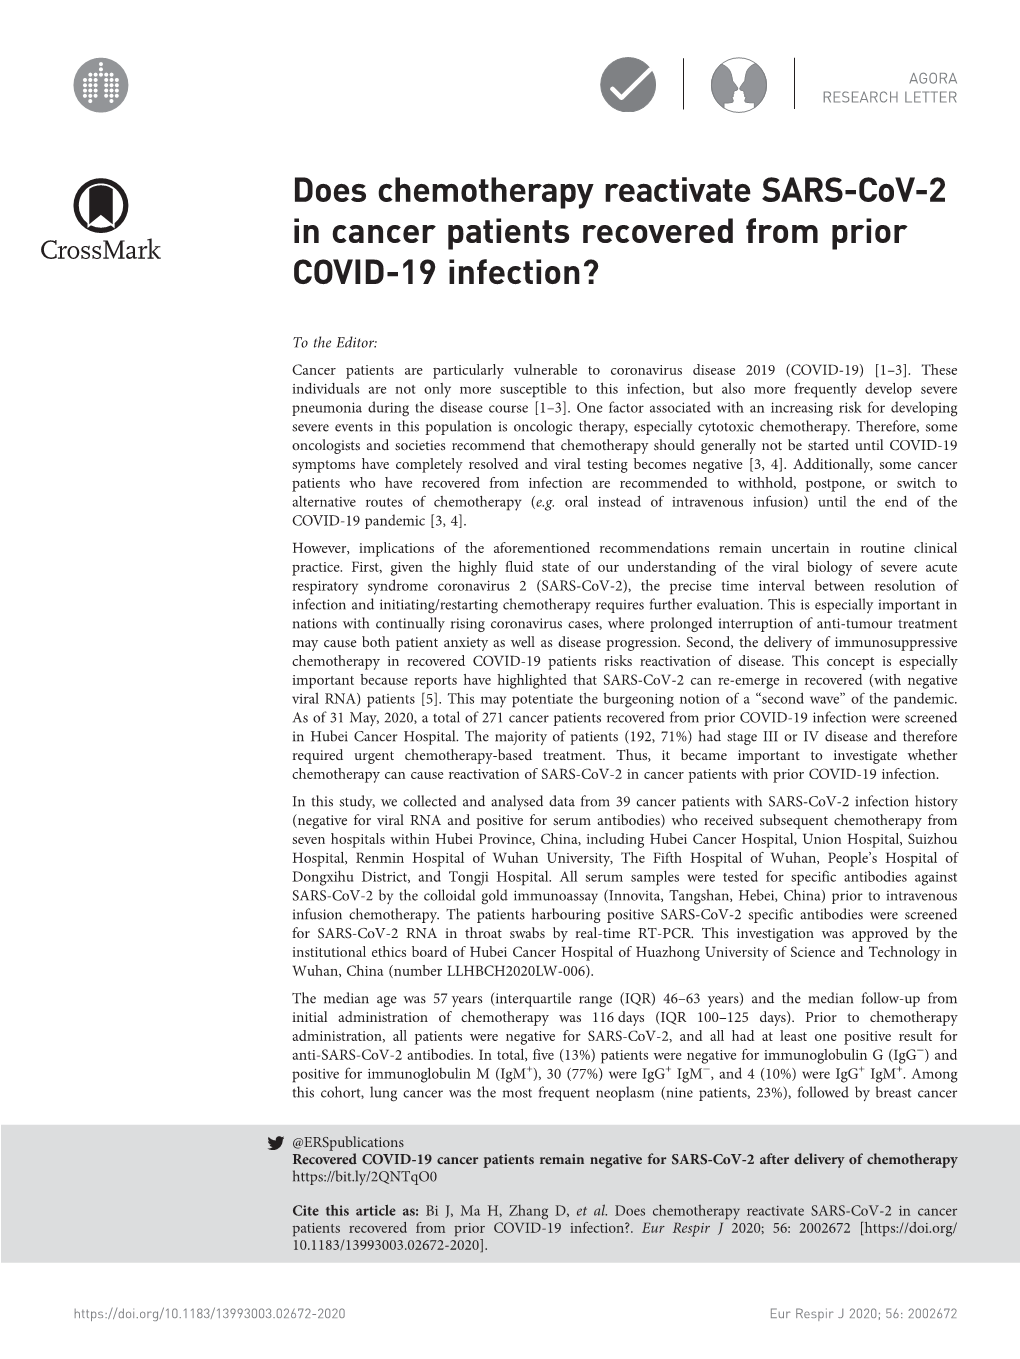 Does Chemotherapy Reactivate SARS-Cov-2 in Cancer Patients Recovered from Prior COVID-19 Infection?